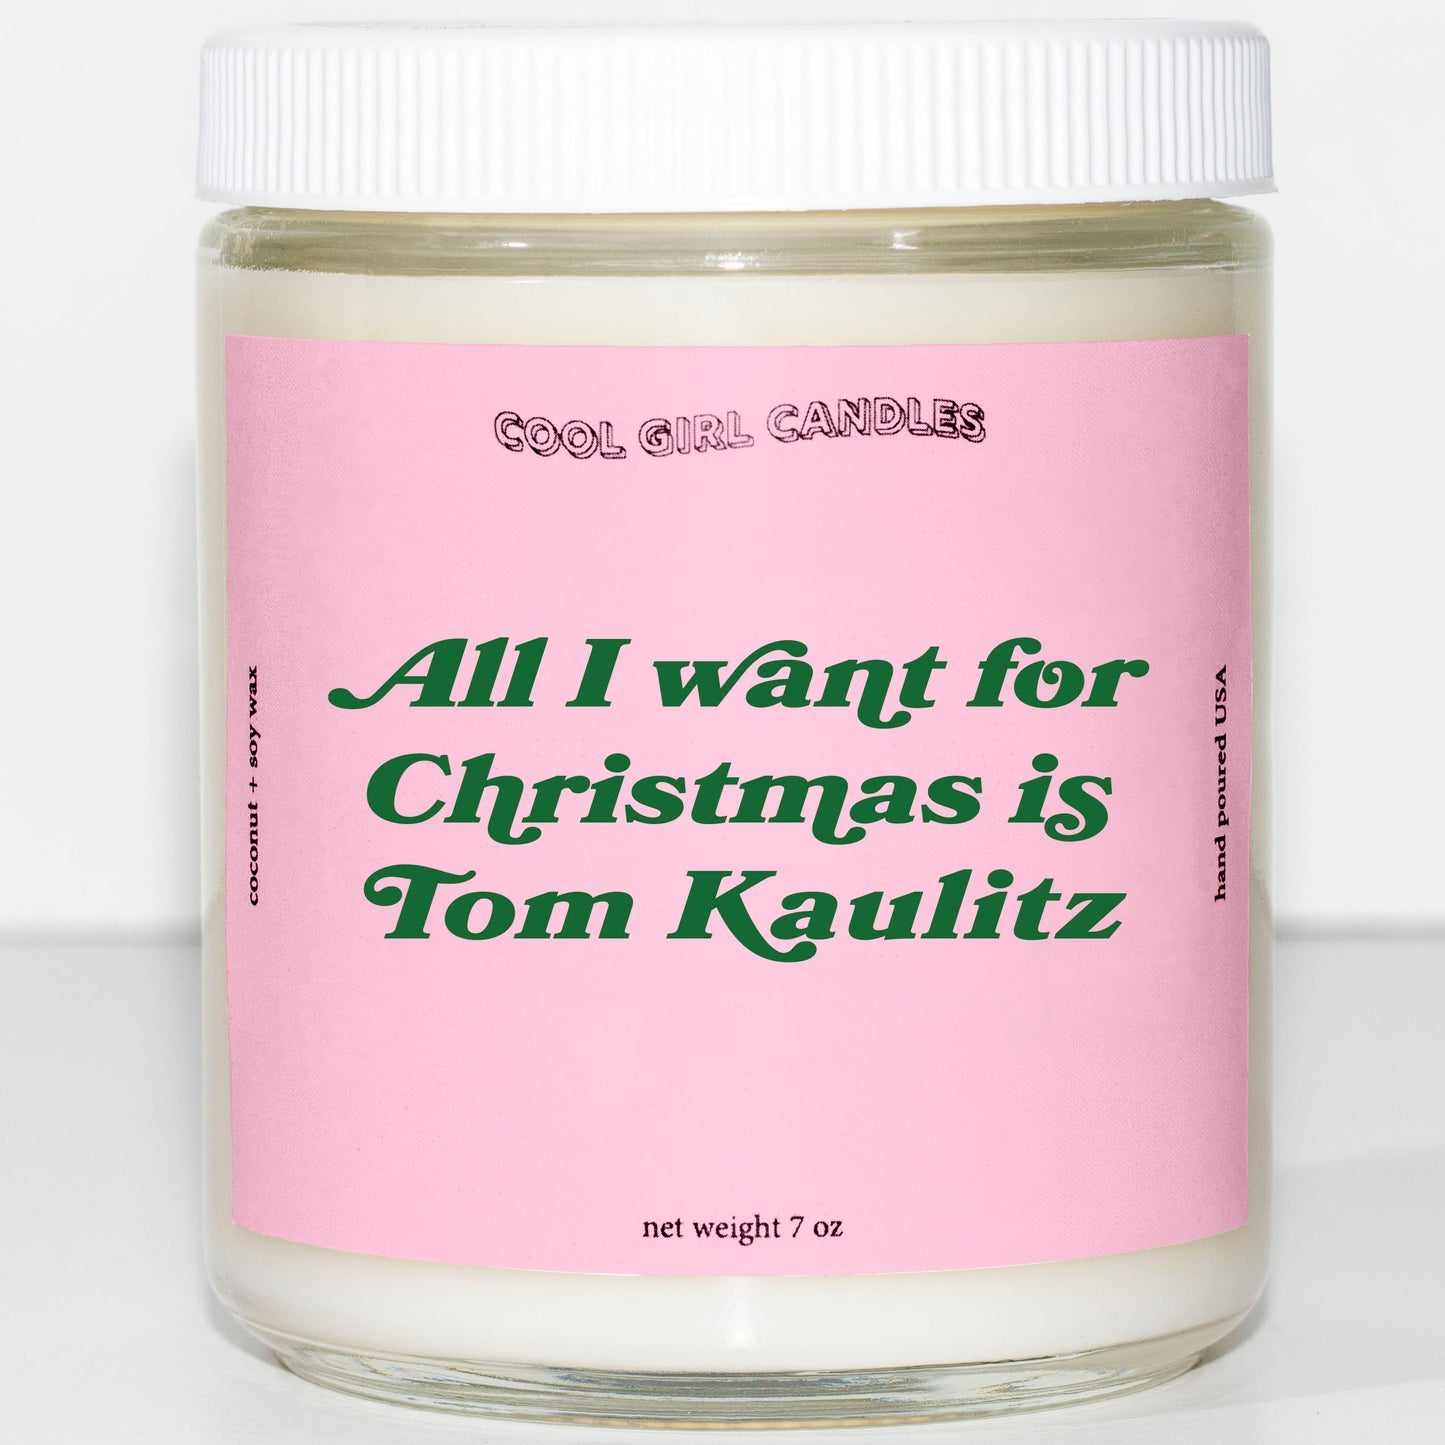 All I want for christmas is tom kaulitz candle by cool girl candles